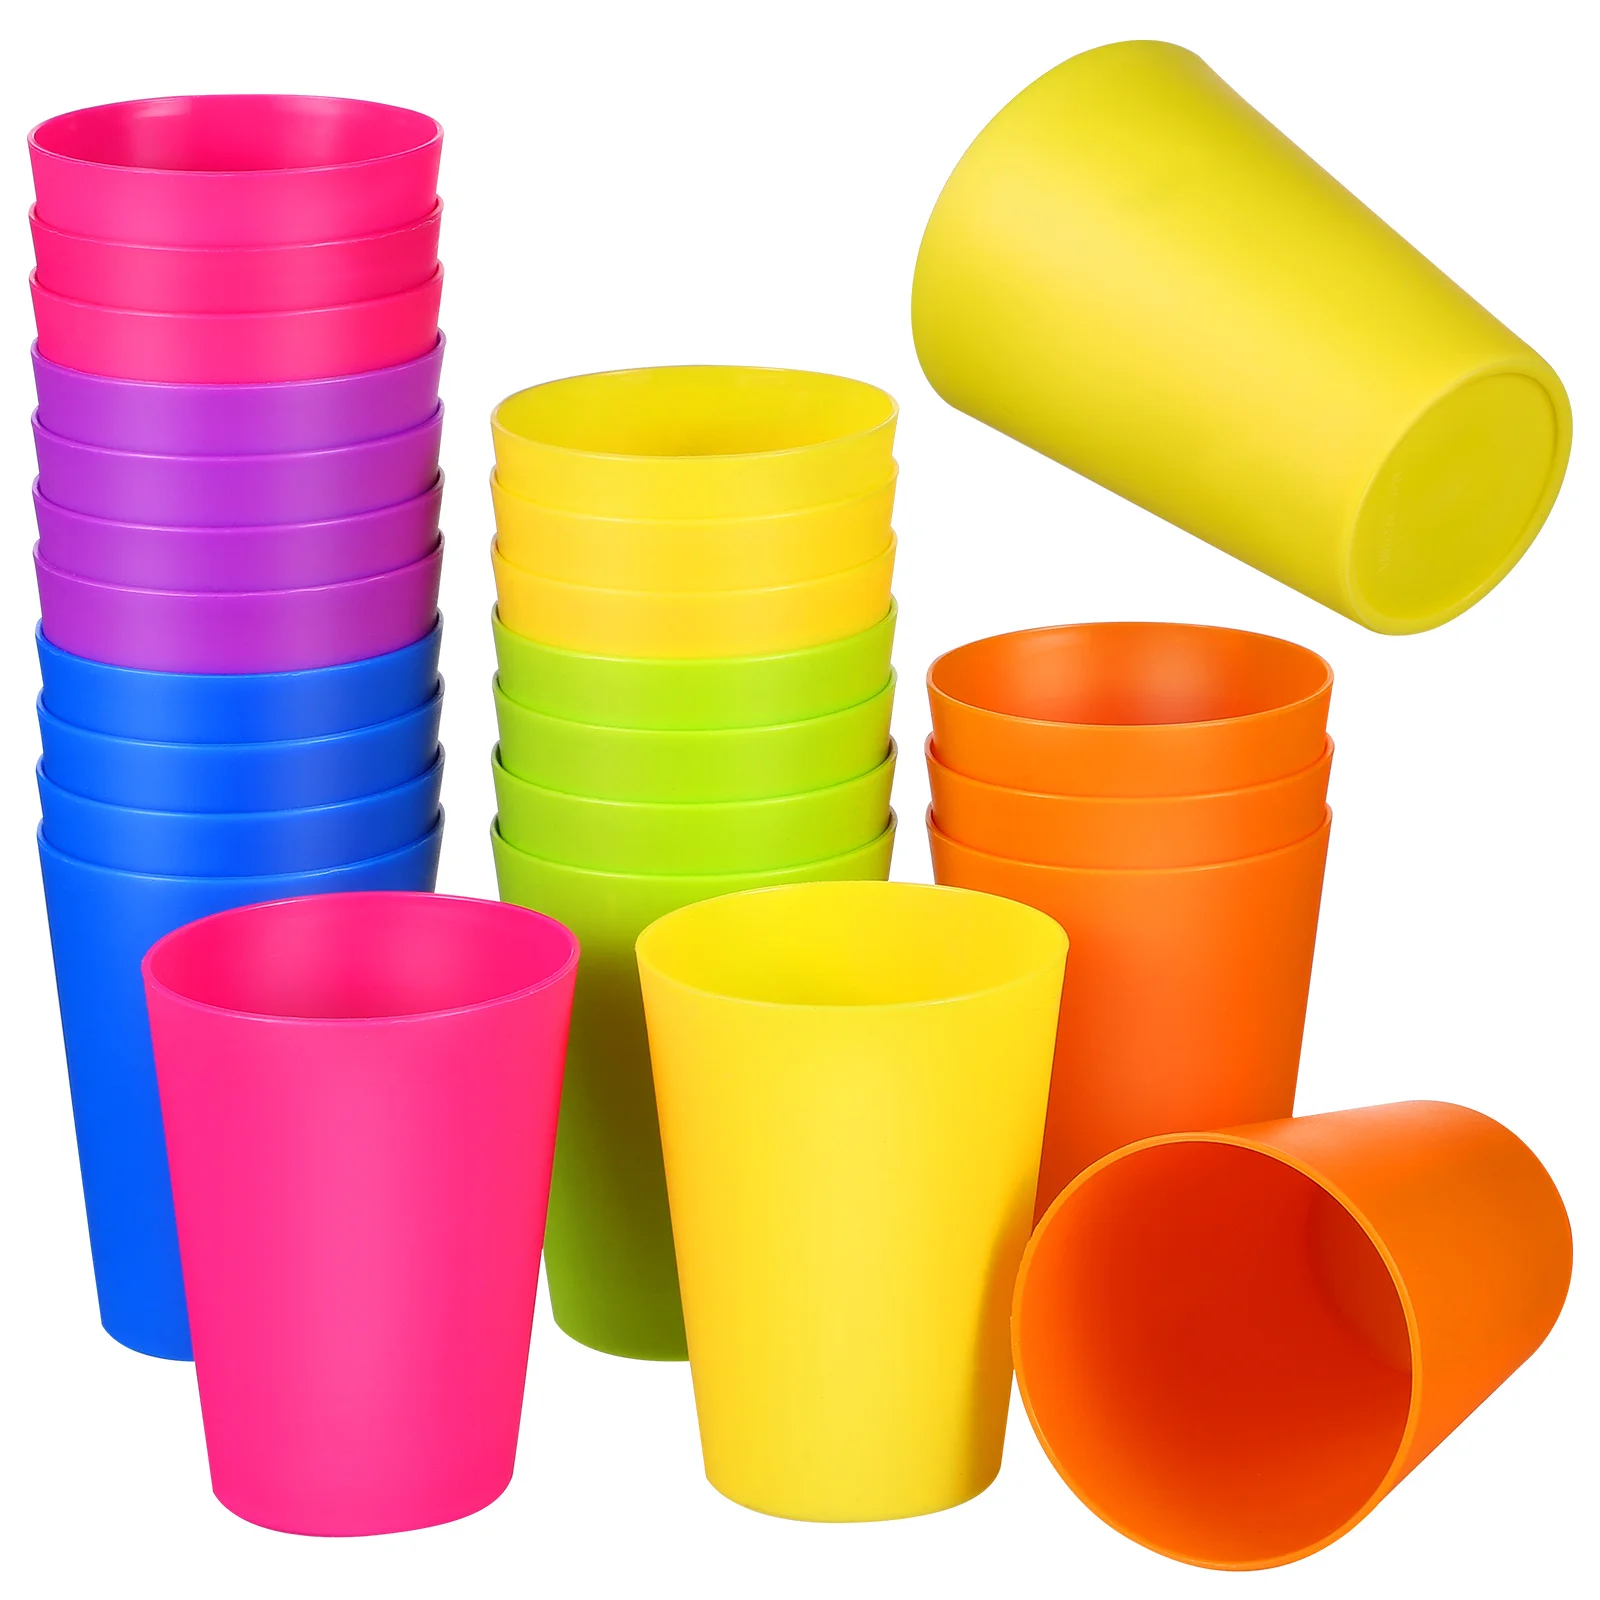 

24 Pcs Plastic Drinking Cups Party Favors Colorful Beverage Cups for Bear